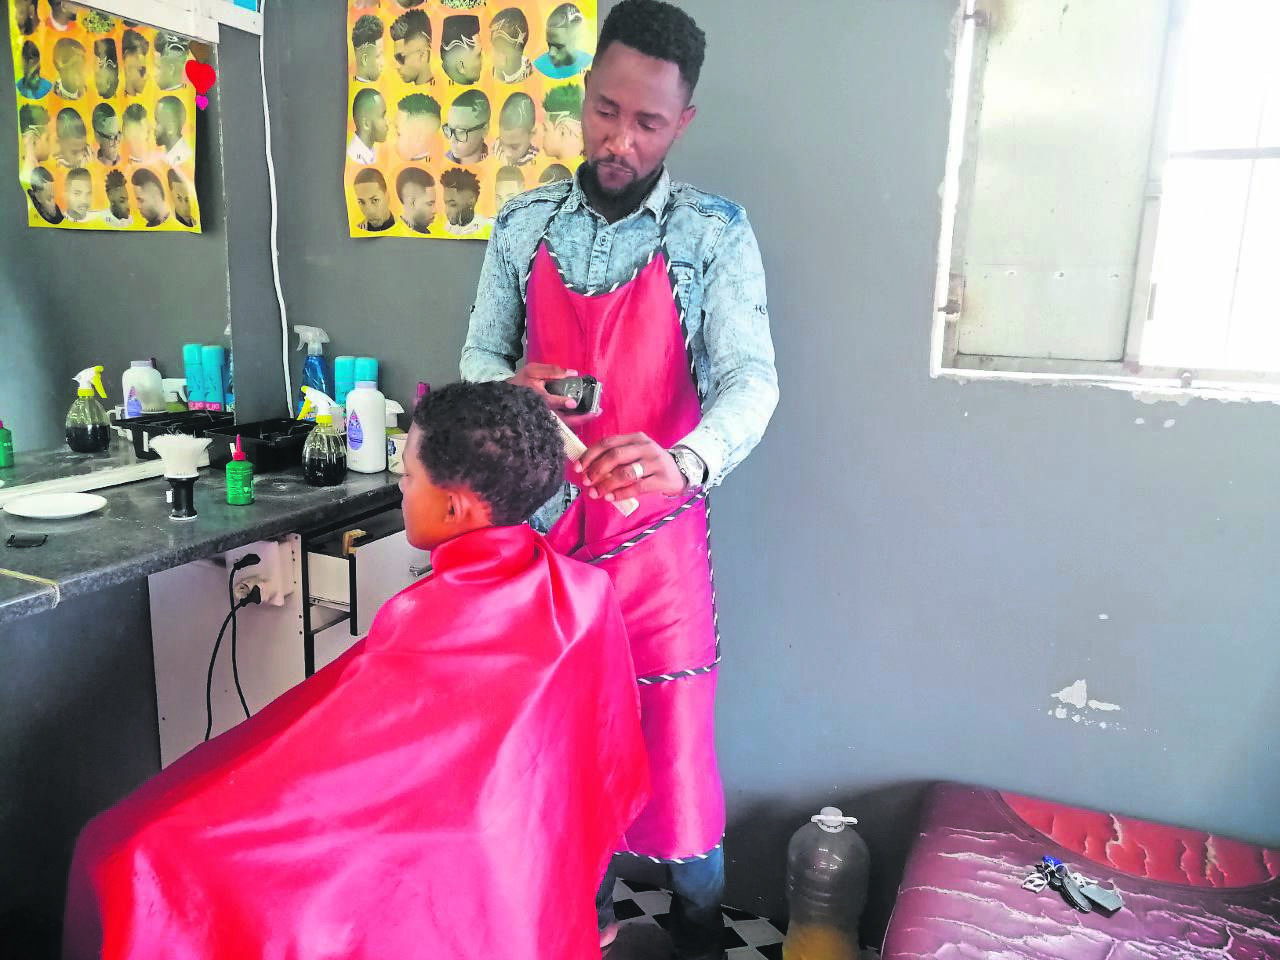 Cassiem Ndabazaniye cuts a young boy’s hair as part of the give dignity initiative.PHOTO: supplied